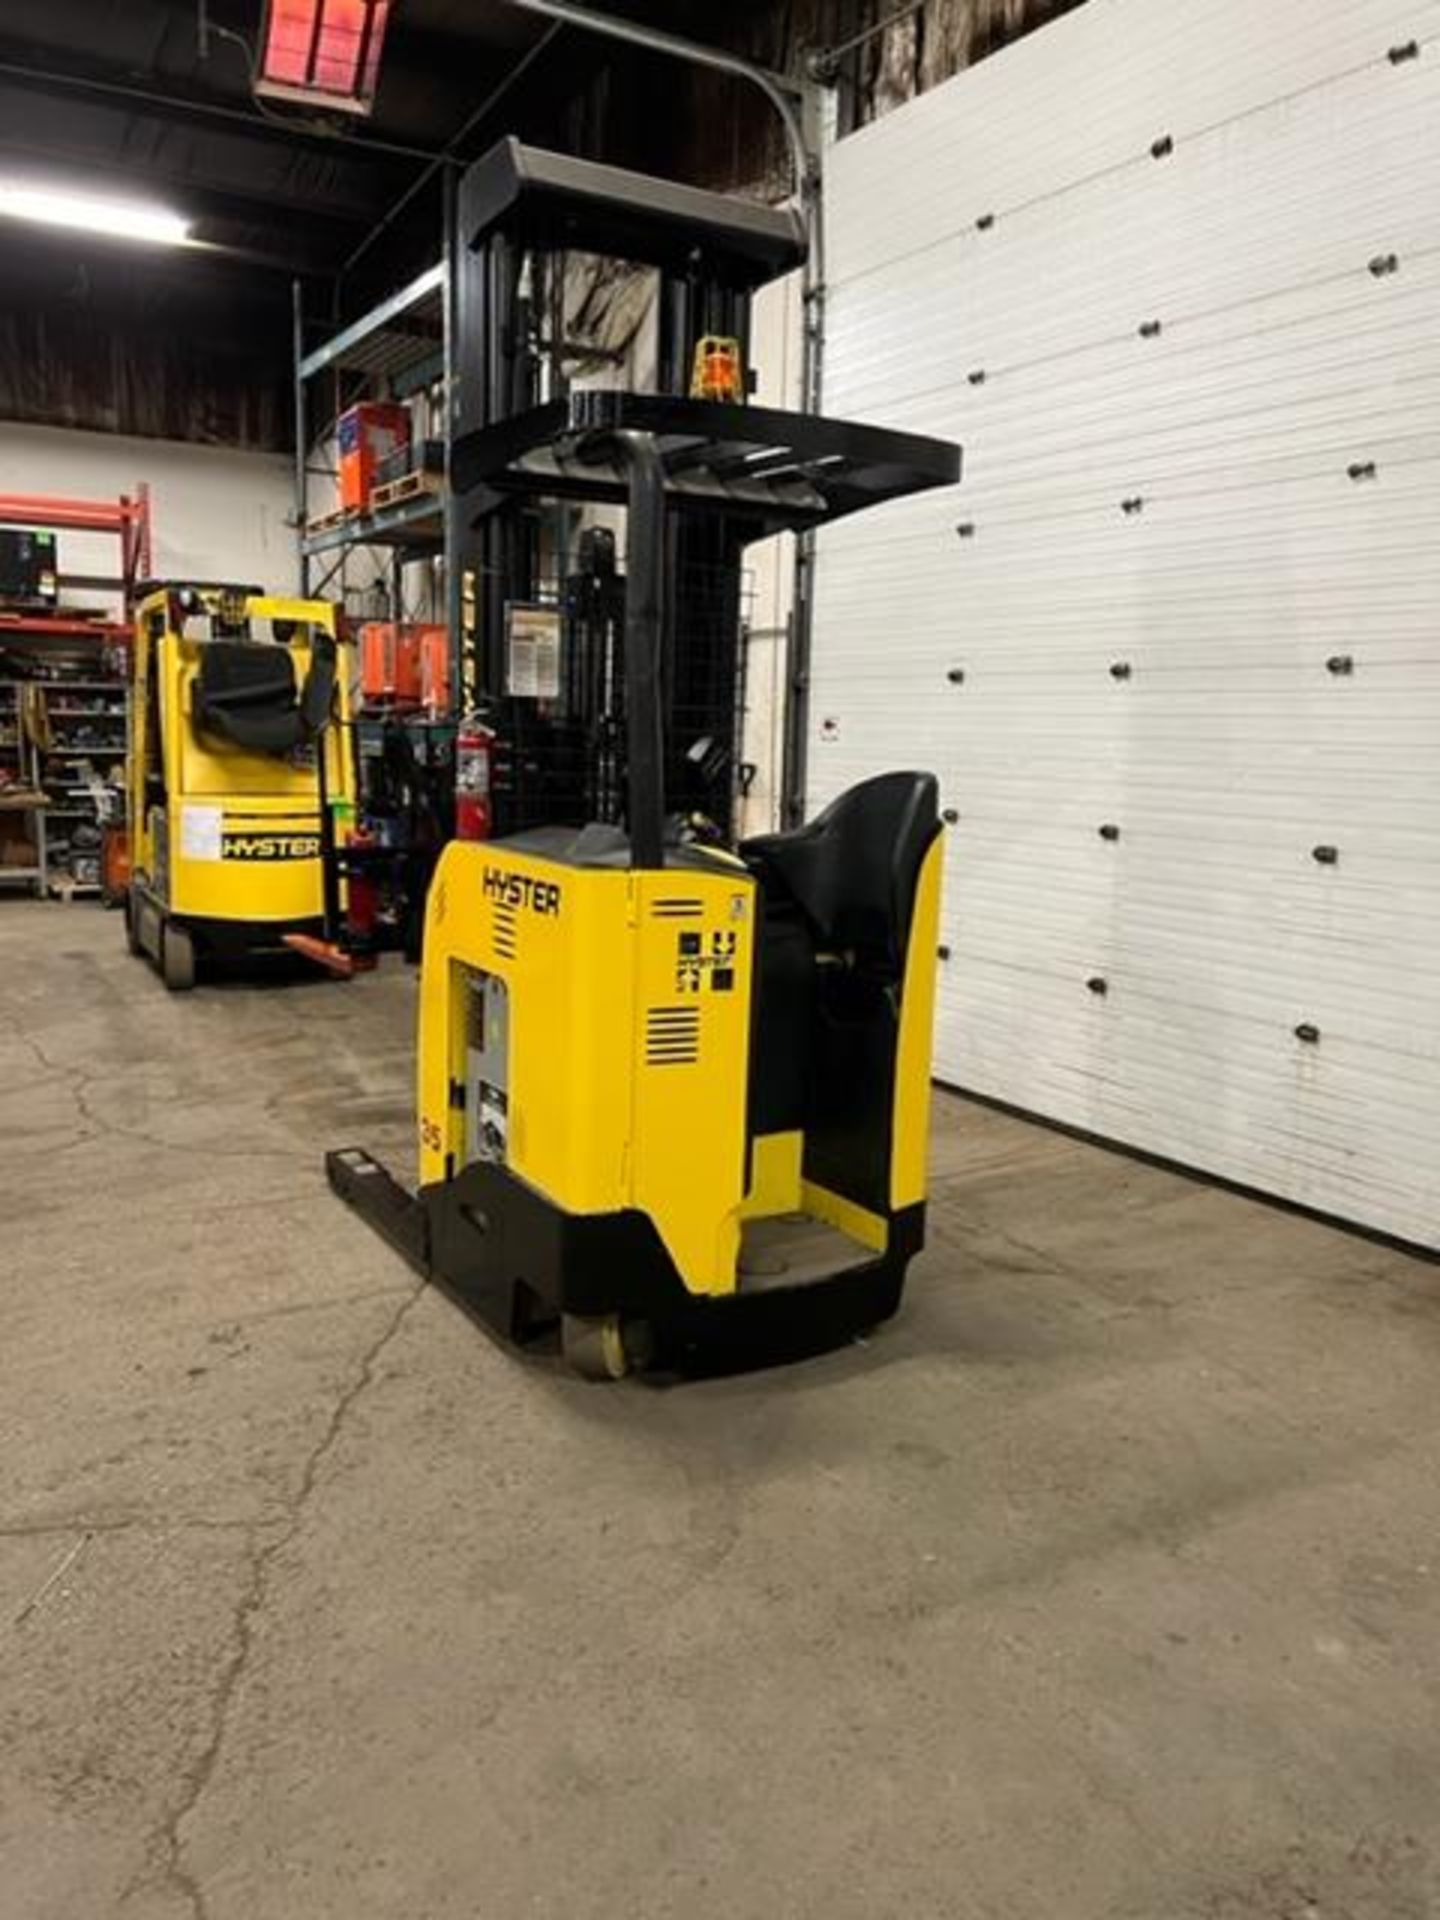 FREE CUSTOMS - 2014 Hyster 35 EXTRA Reach Truck Pallet Lifter 3500lbs capacity electric MINT machine - Image 4 of 4